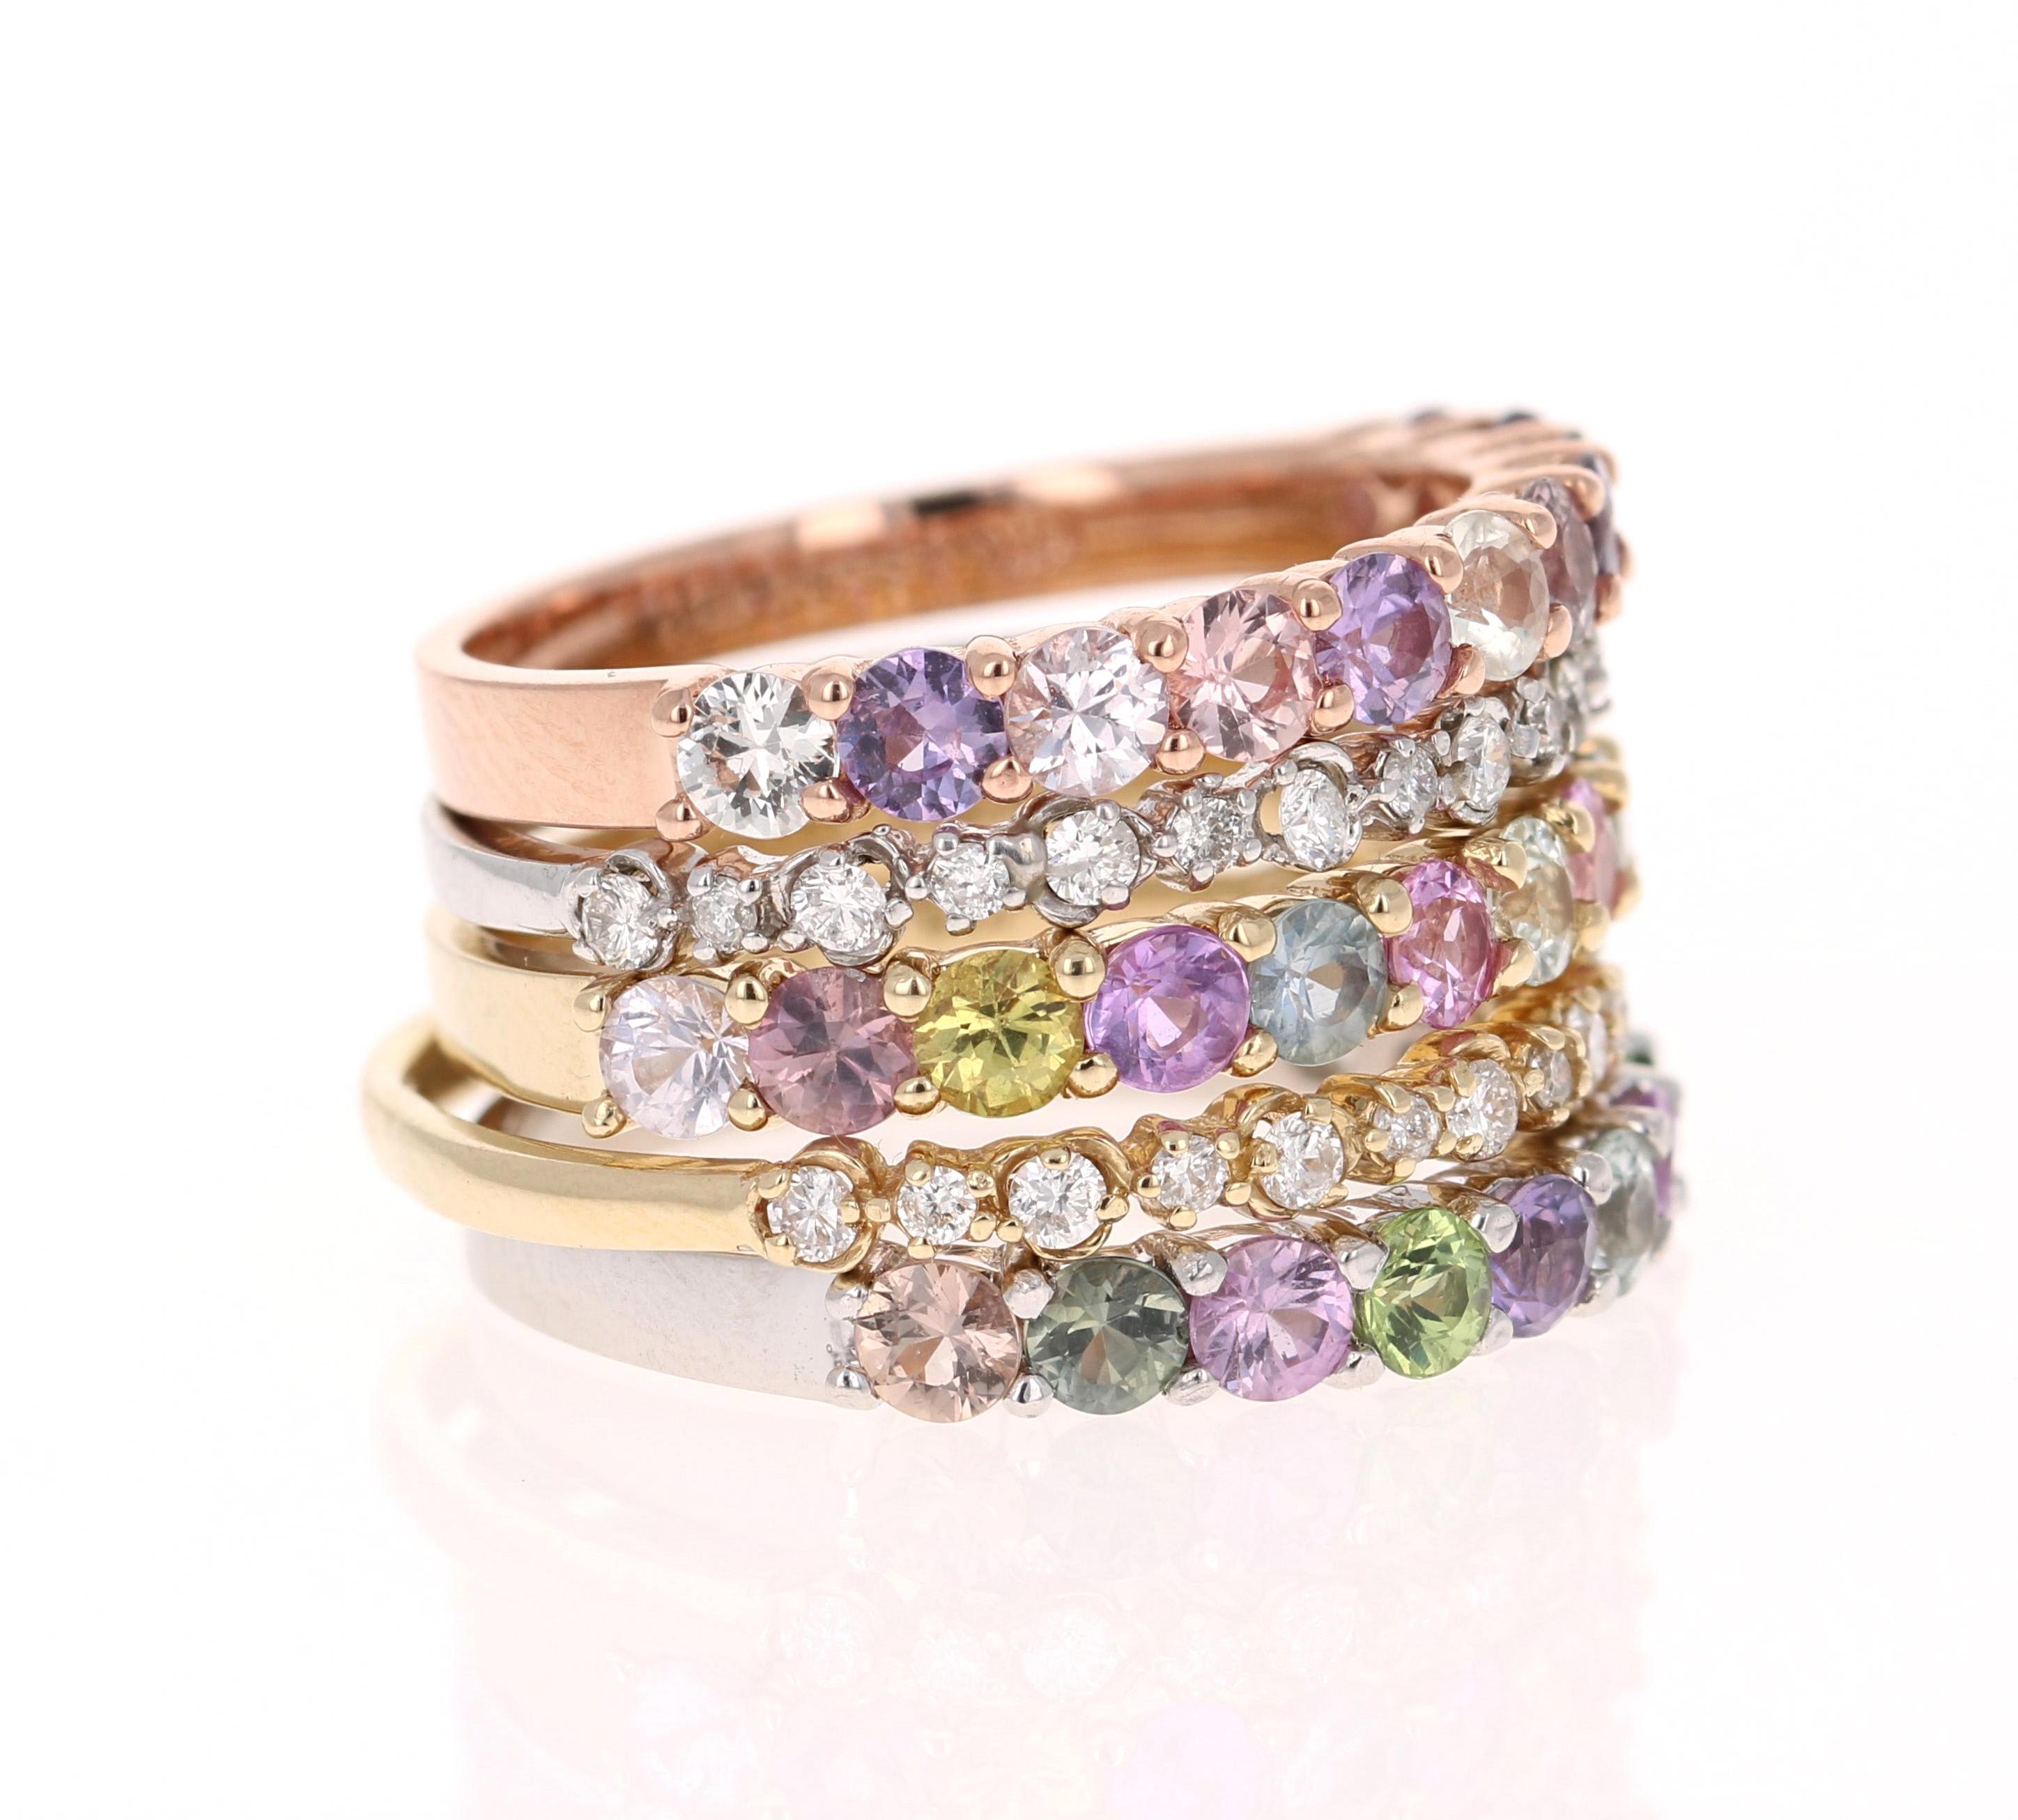 This is a set of 5 Bands and the description is as follows:

3 Multicolored Sapphire Bands = 33 Multi Colored Sapphires weighing 4.04 Carats 
2 Round Cut Diamond Bands = 30 Round Cut Diamonds weighing 0.46 Carats (Clarity: SI2, Color: F)
14K Gold